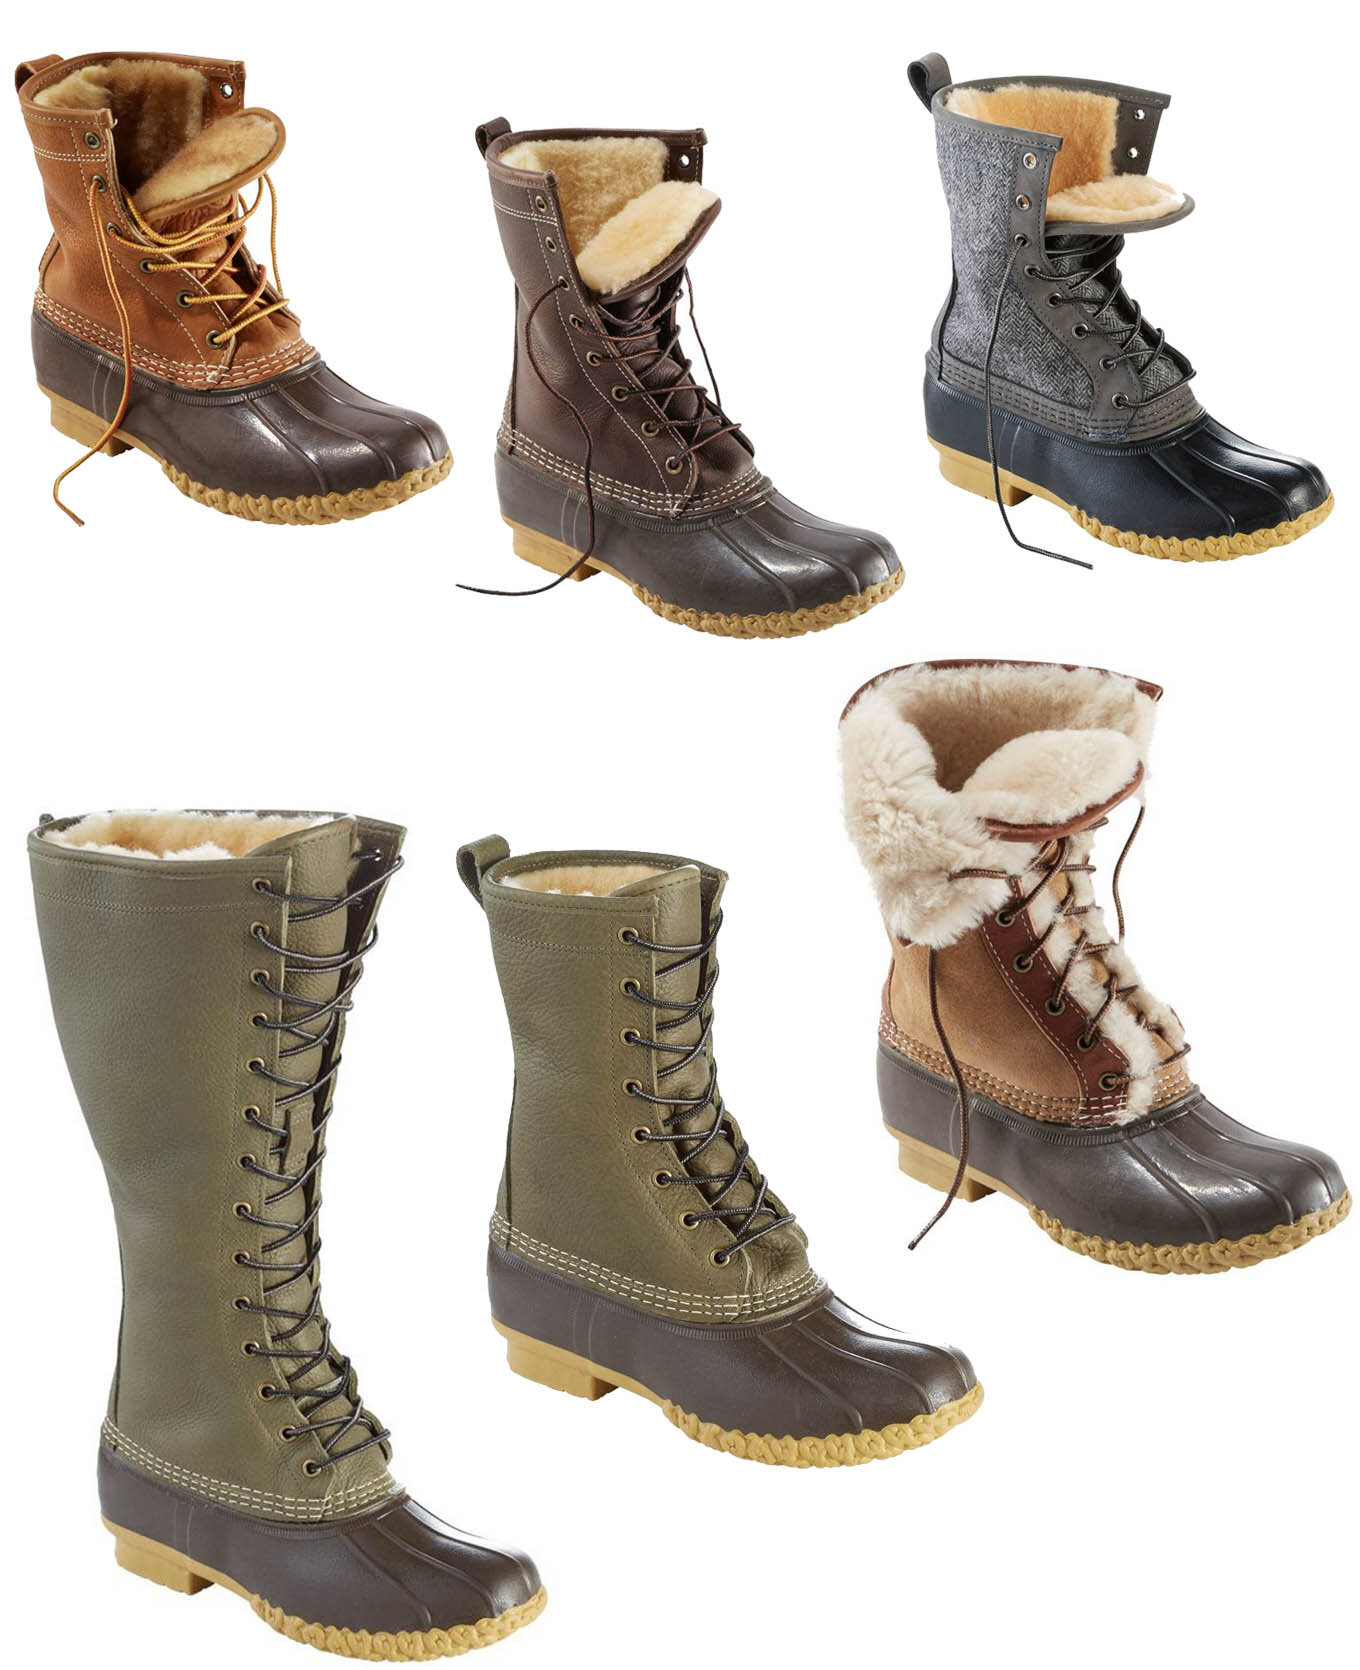 chamois lined bean boots